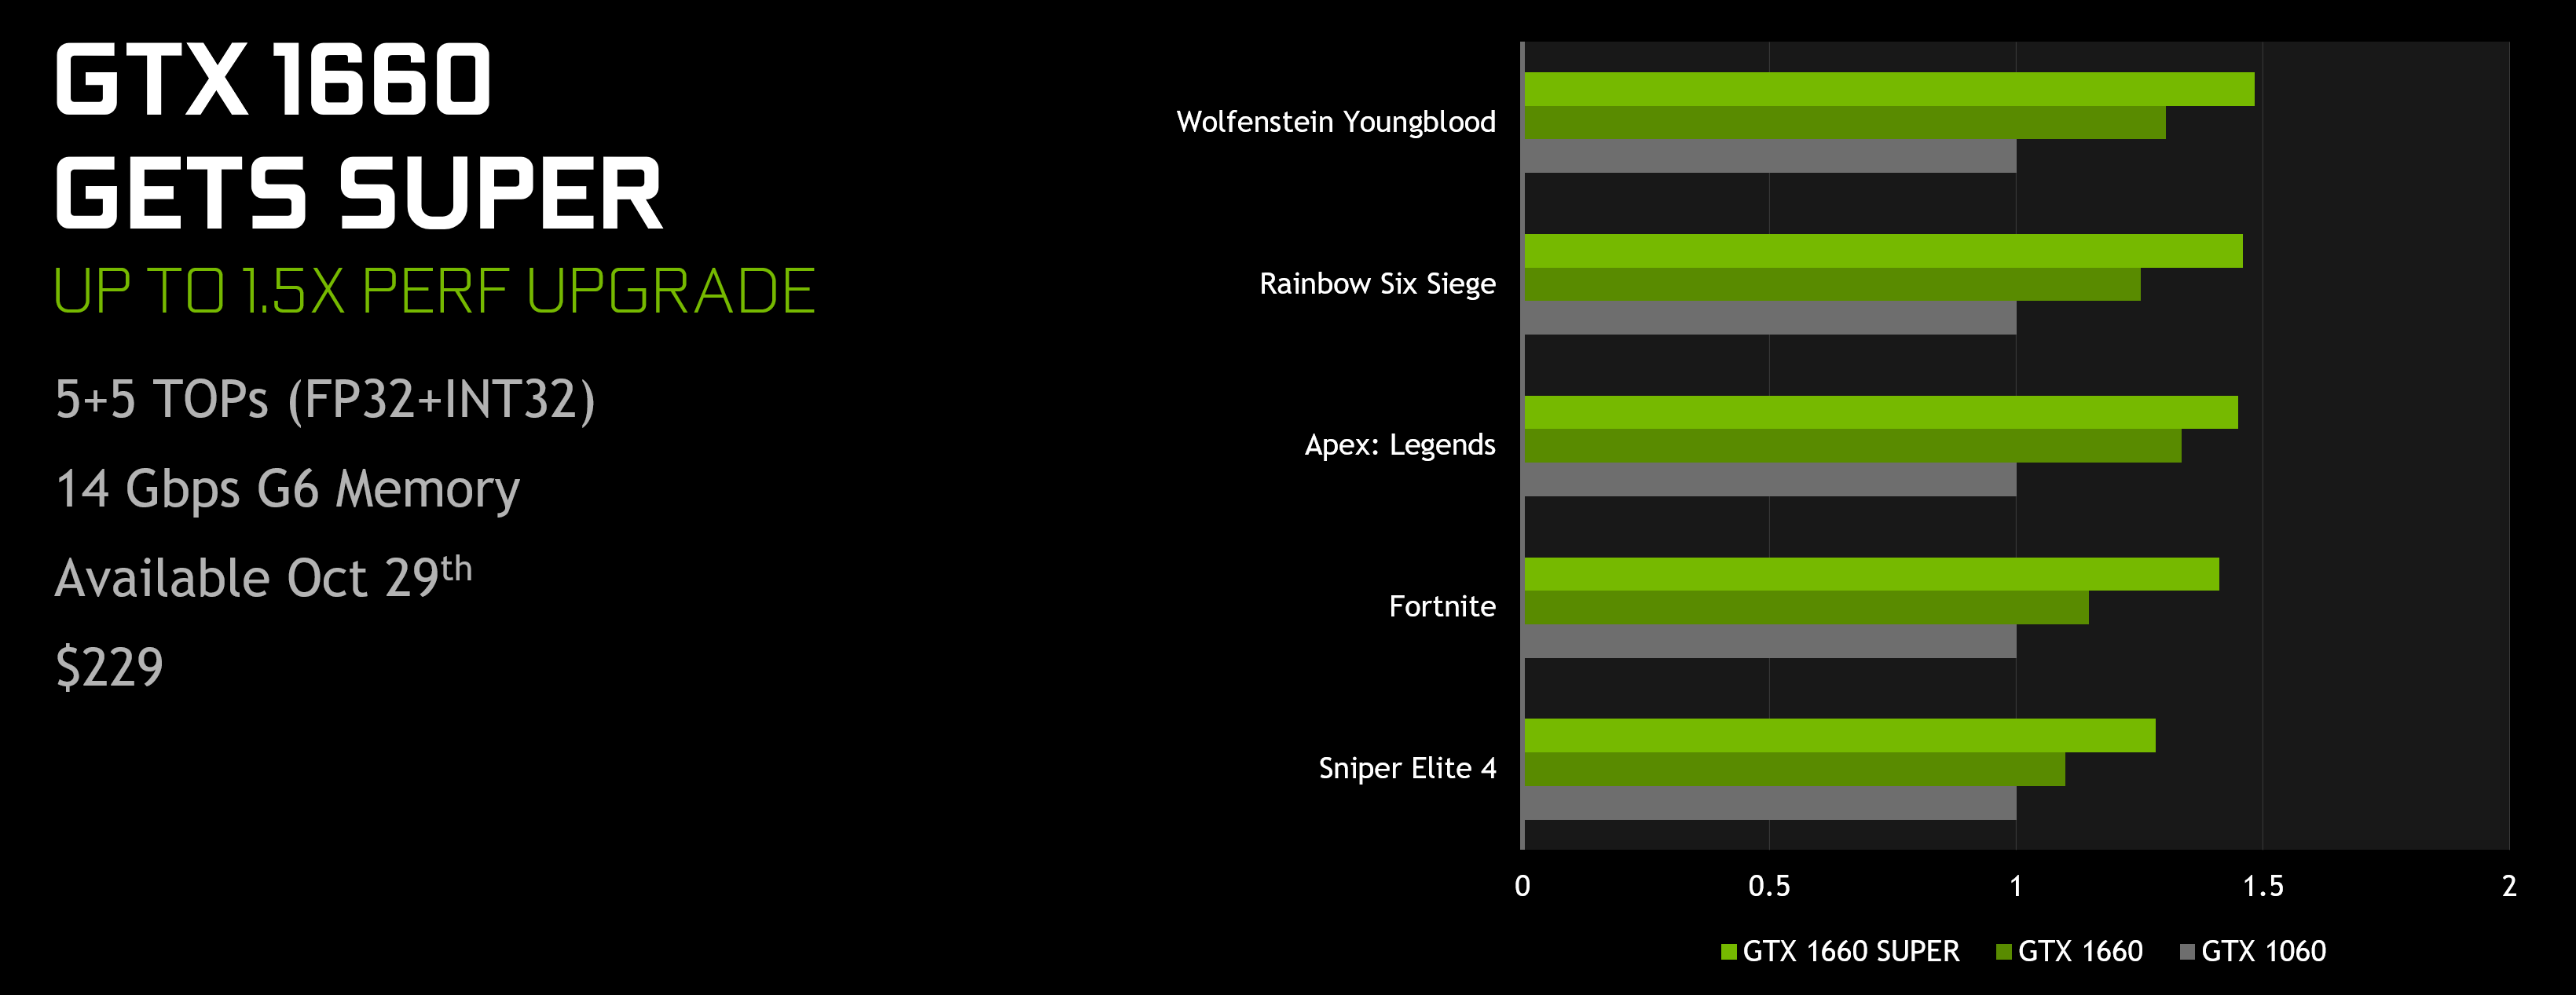 Introducing GeForce GTX 1660 and 1650 SUPER GPUs, New Gaming Features For All GeForce Gamers | GeForce News | NVIDIA